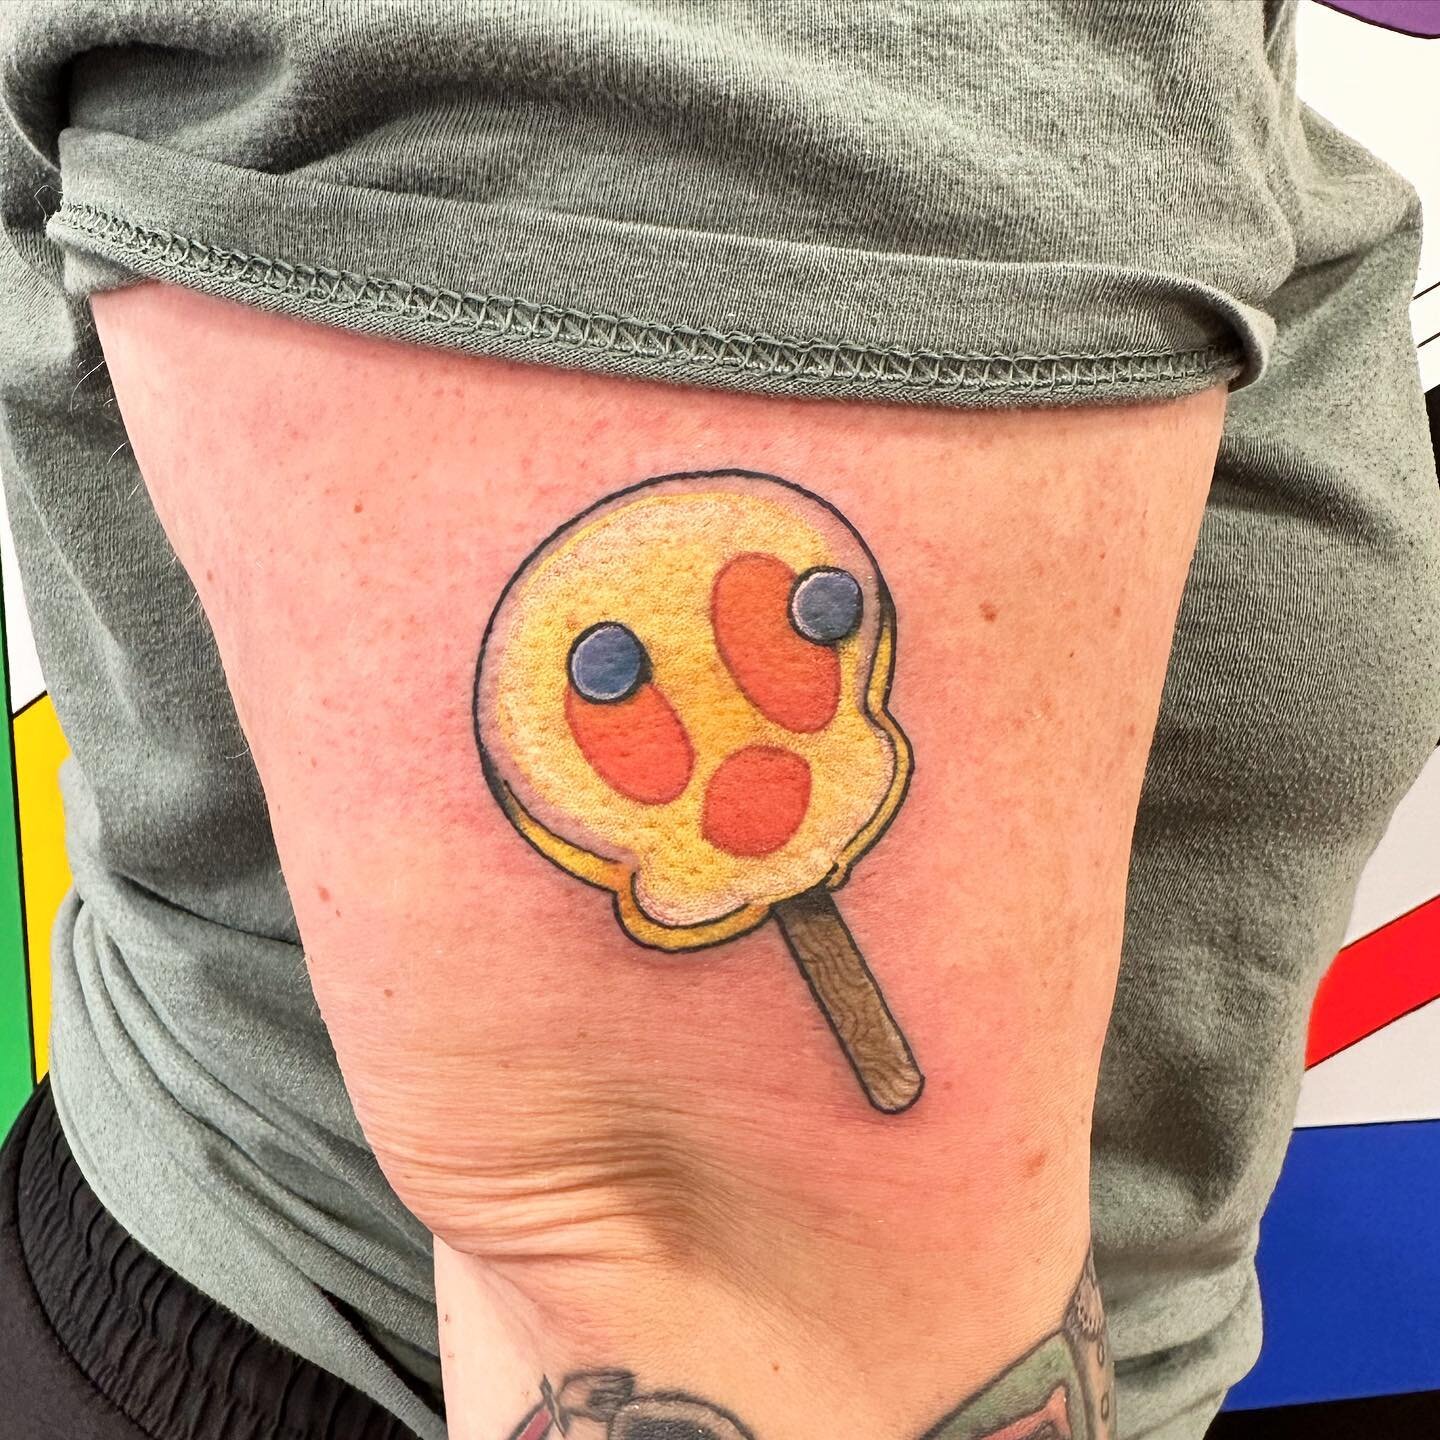 ✨Tweety Popsicle✨ for the homie @cassie____johnson! Thanks for always being the coolest. Love ya friend! #tweetybirdpopsicletattoo #tweety #tweetybird #popsicletattoo #tattoo #tattoos #kankakeecounty #kankakeetattoo #bradleyillinois #chicagotattoo #i